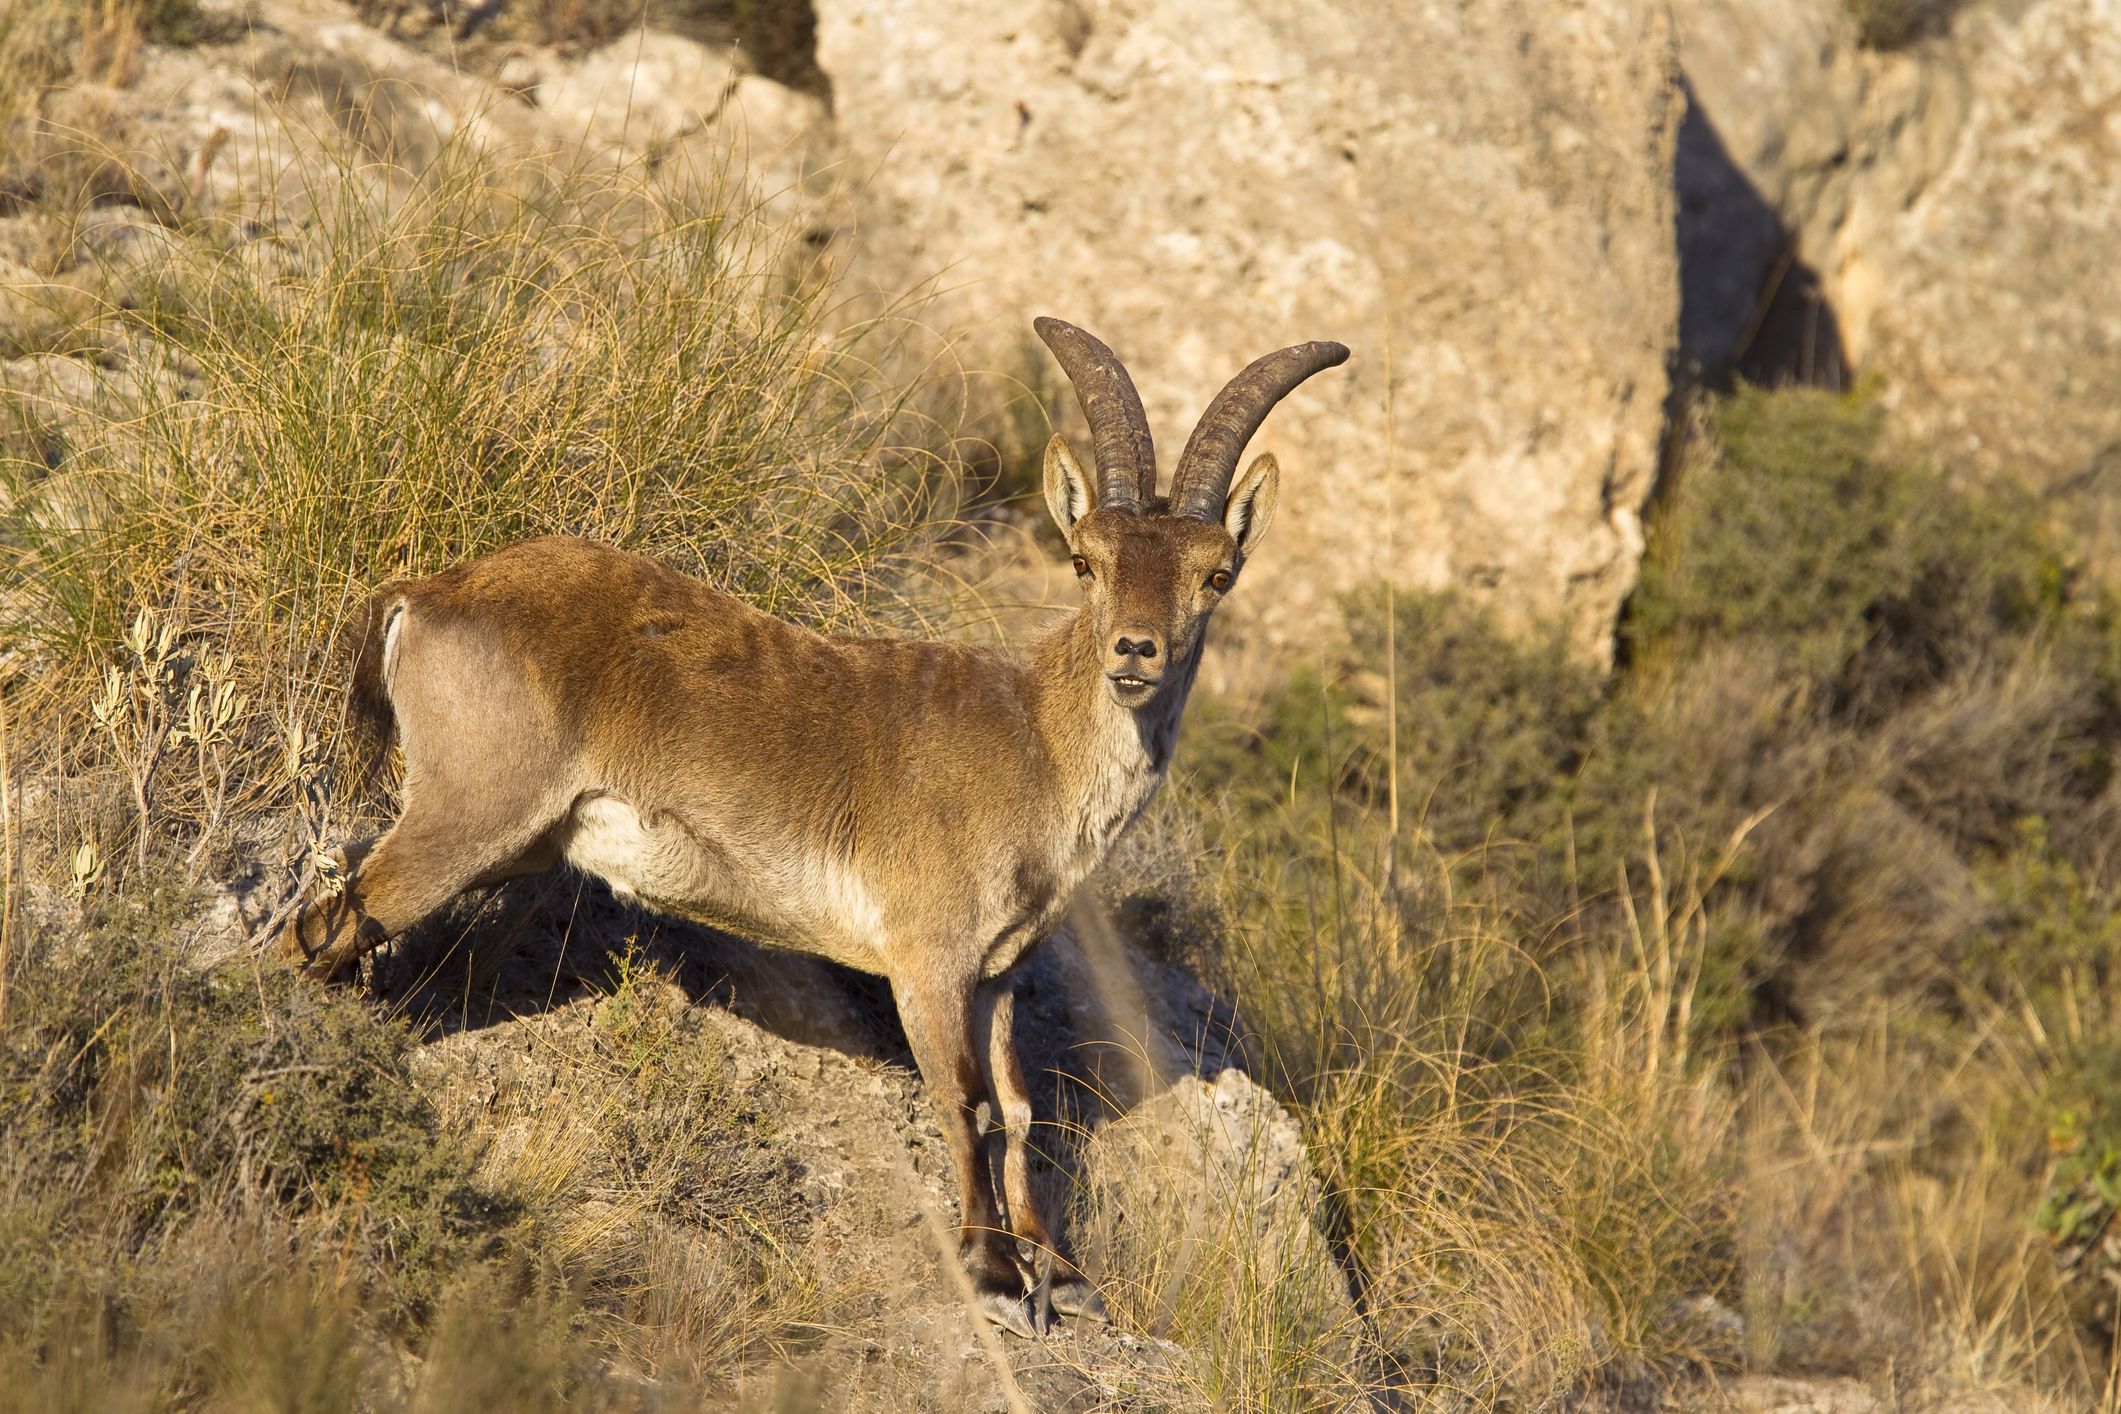 <p>This mountain goat was <a href="https://www.extinctanimals.org/pyrenean-ibex.htm">officially declared extinct</a> in 2000 after Celia, the last wild member of the species, died after a tree branch fell on her. Overhunting, inbreeding, and competition with domestic livestock for food is believed to have led to its demise. Efforts to <a href="https://news.cals.wisc.edu/2021/10/07/the-race-to-the-animal-vault-cals-researchers-look-for-ways-to-store-genetic-samples-and-use-cloning-to-revitalize-endangered-and-possibly-extinct-species/">clone the species in 2009</a> (scientists managed to biopsy Celia's skin before she died) resulted in the birth of a clone that lived for only a few minutes. </p>